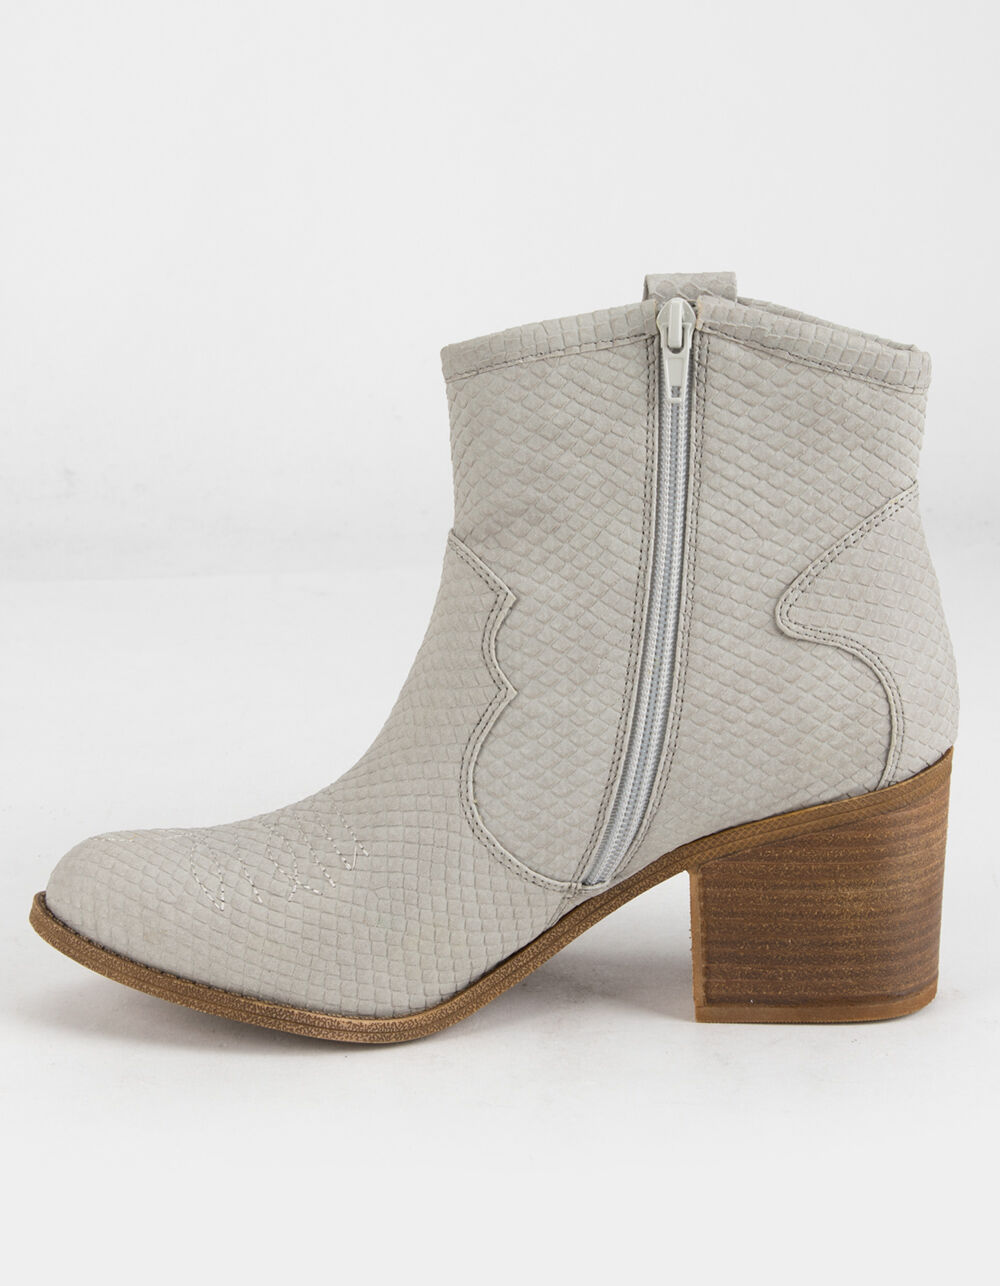 DIRTY LAUNDRY Unite Womens Gray Boots - GRAY | Tillys